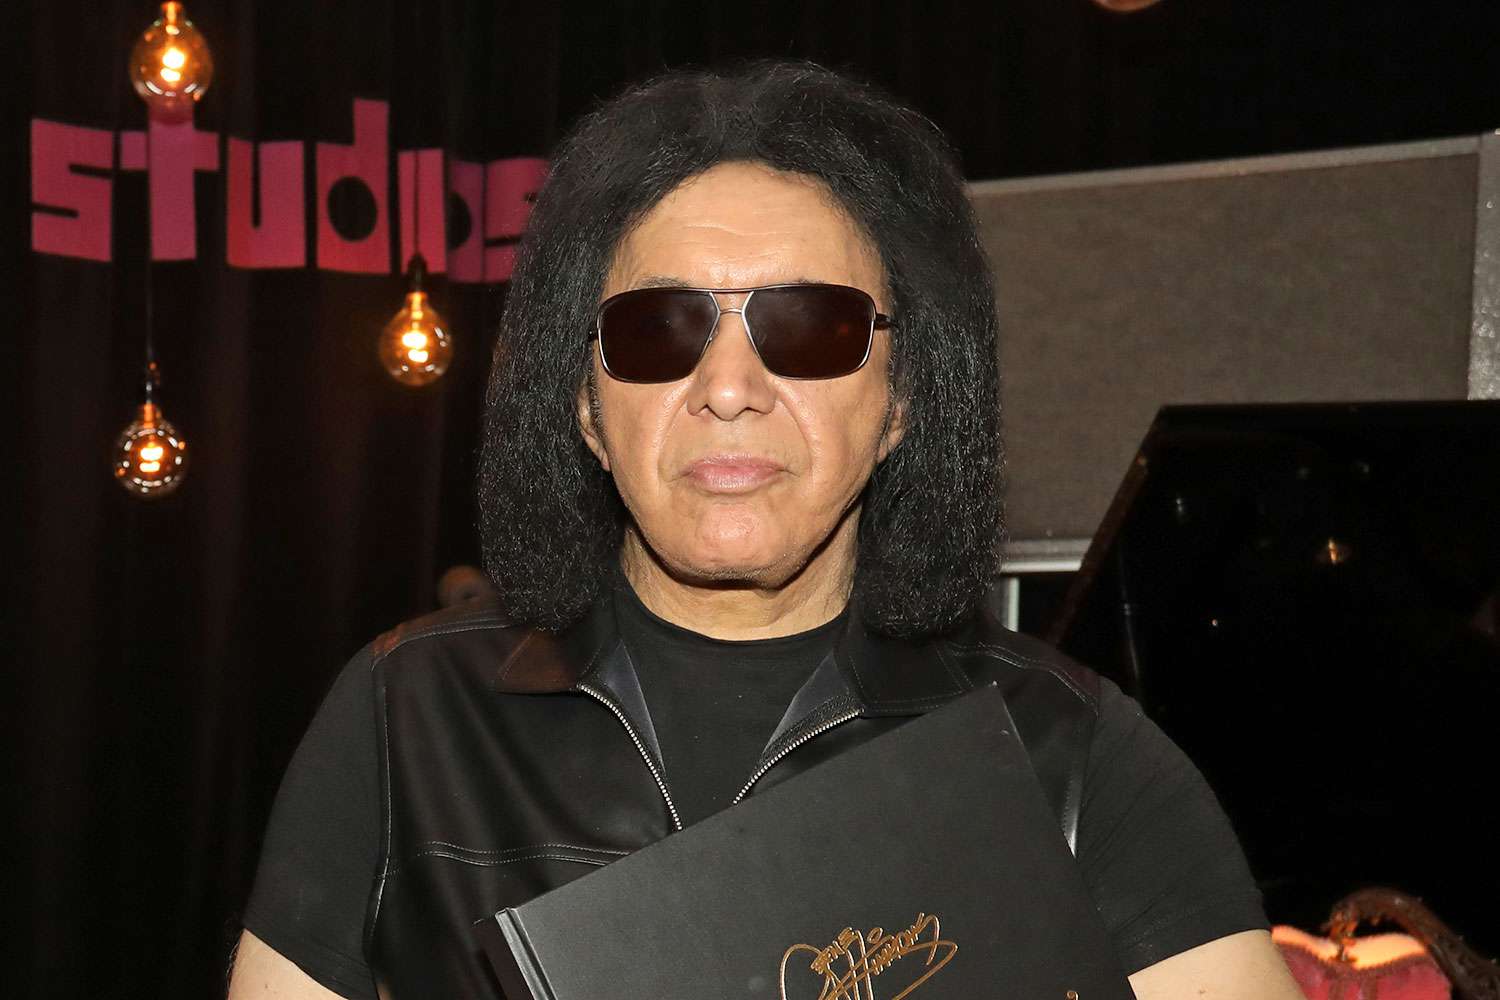 NEW YORK, NY - SEPTEMBER 15: Musician Gene Simmons from the band KISS attends "The Vault" launch at Electric Lady Studio on September 15, 2017 in New York City